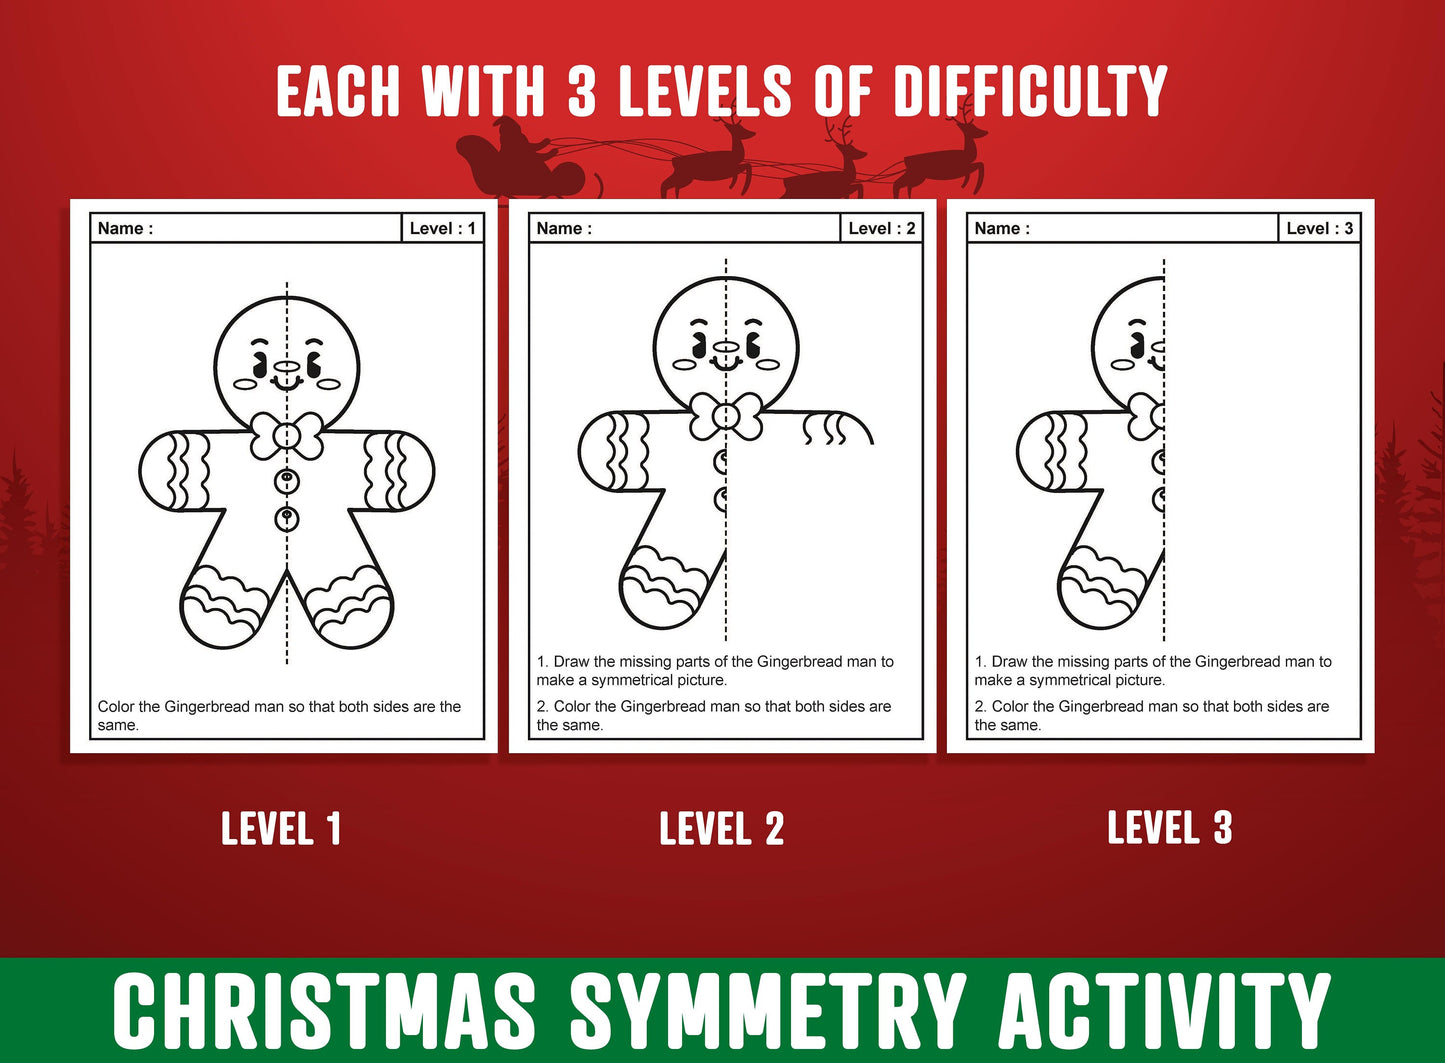 Christmas Symmetry Worksheet, Christmas Theme Lines of Symmetry Activity, 24 Pages, Includes 8 Designs, Each With 3 Levels of Difficulty